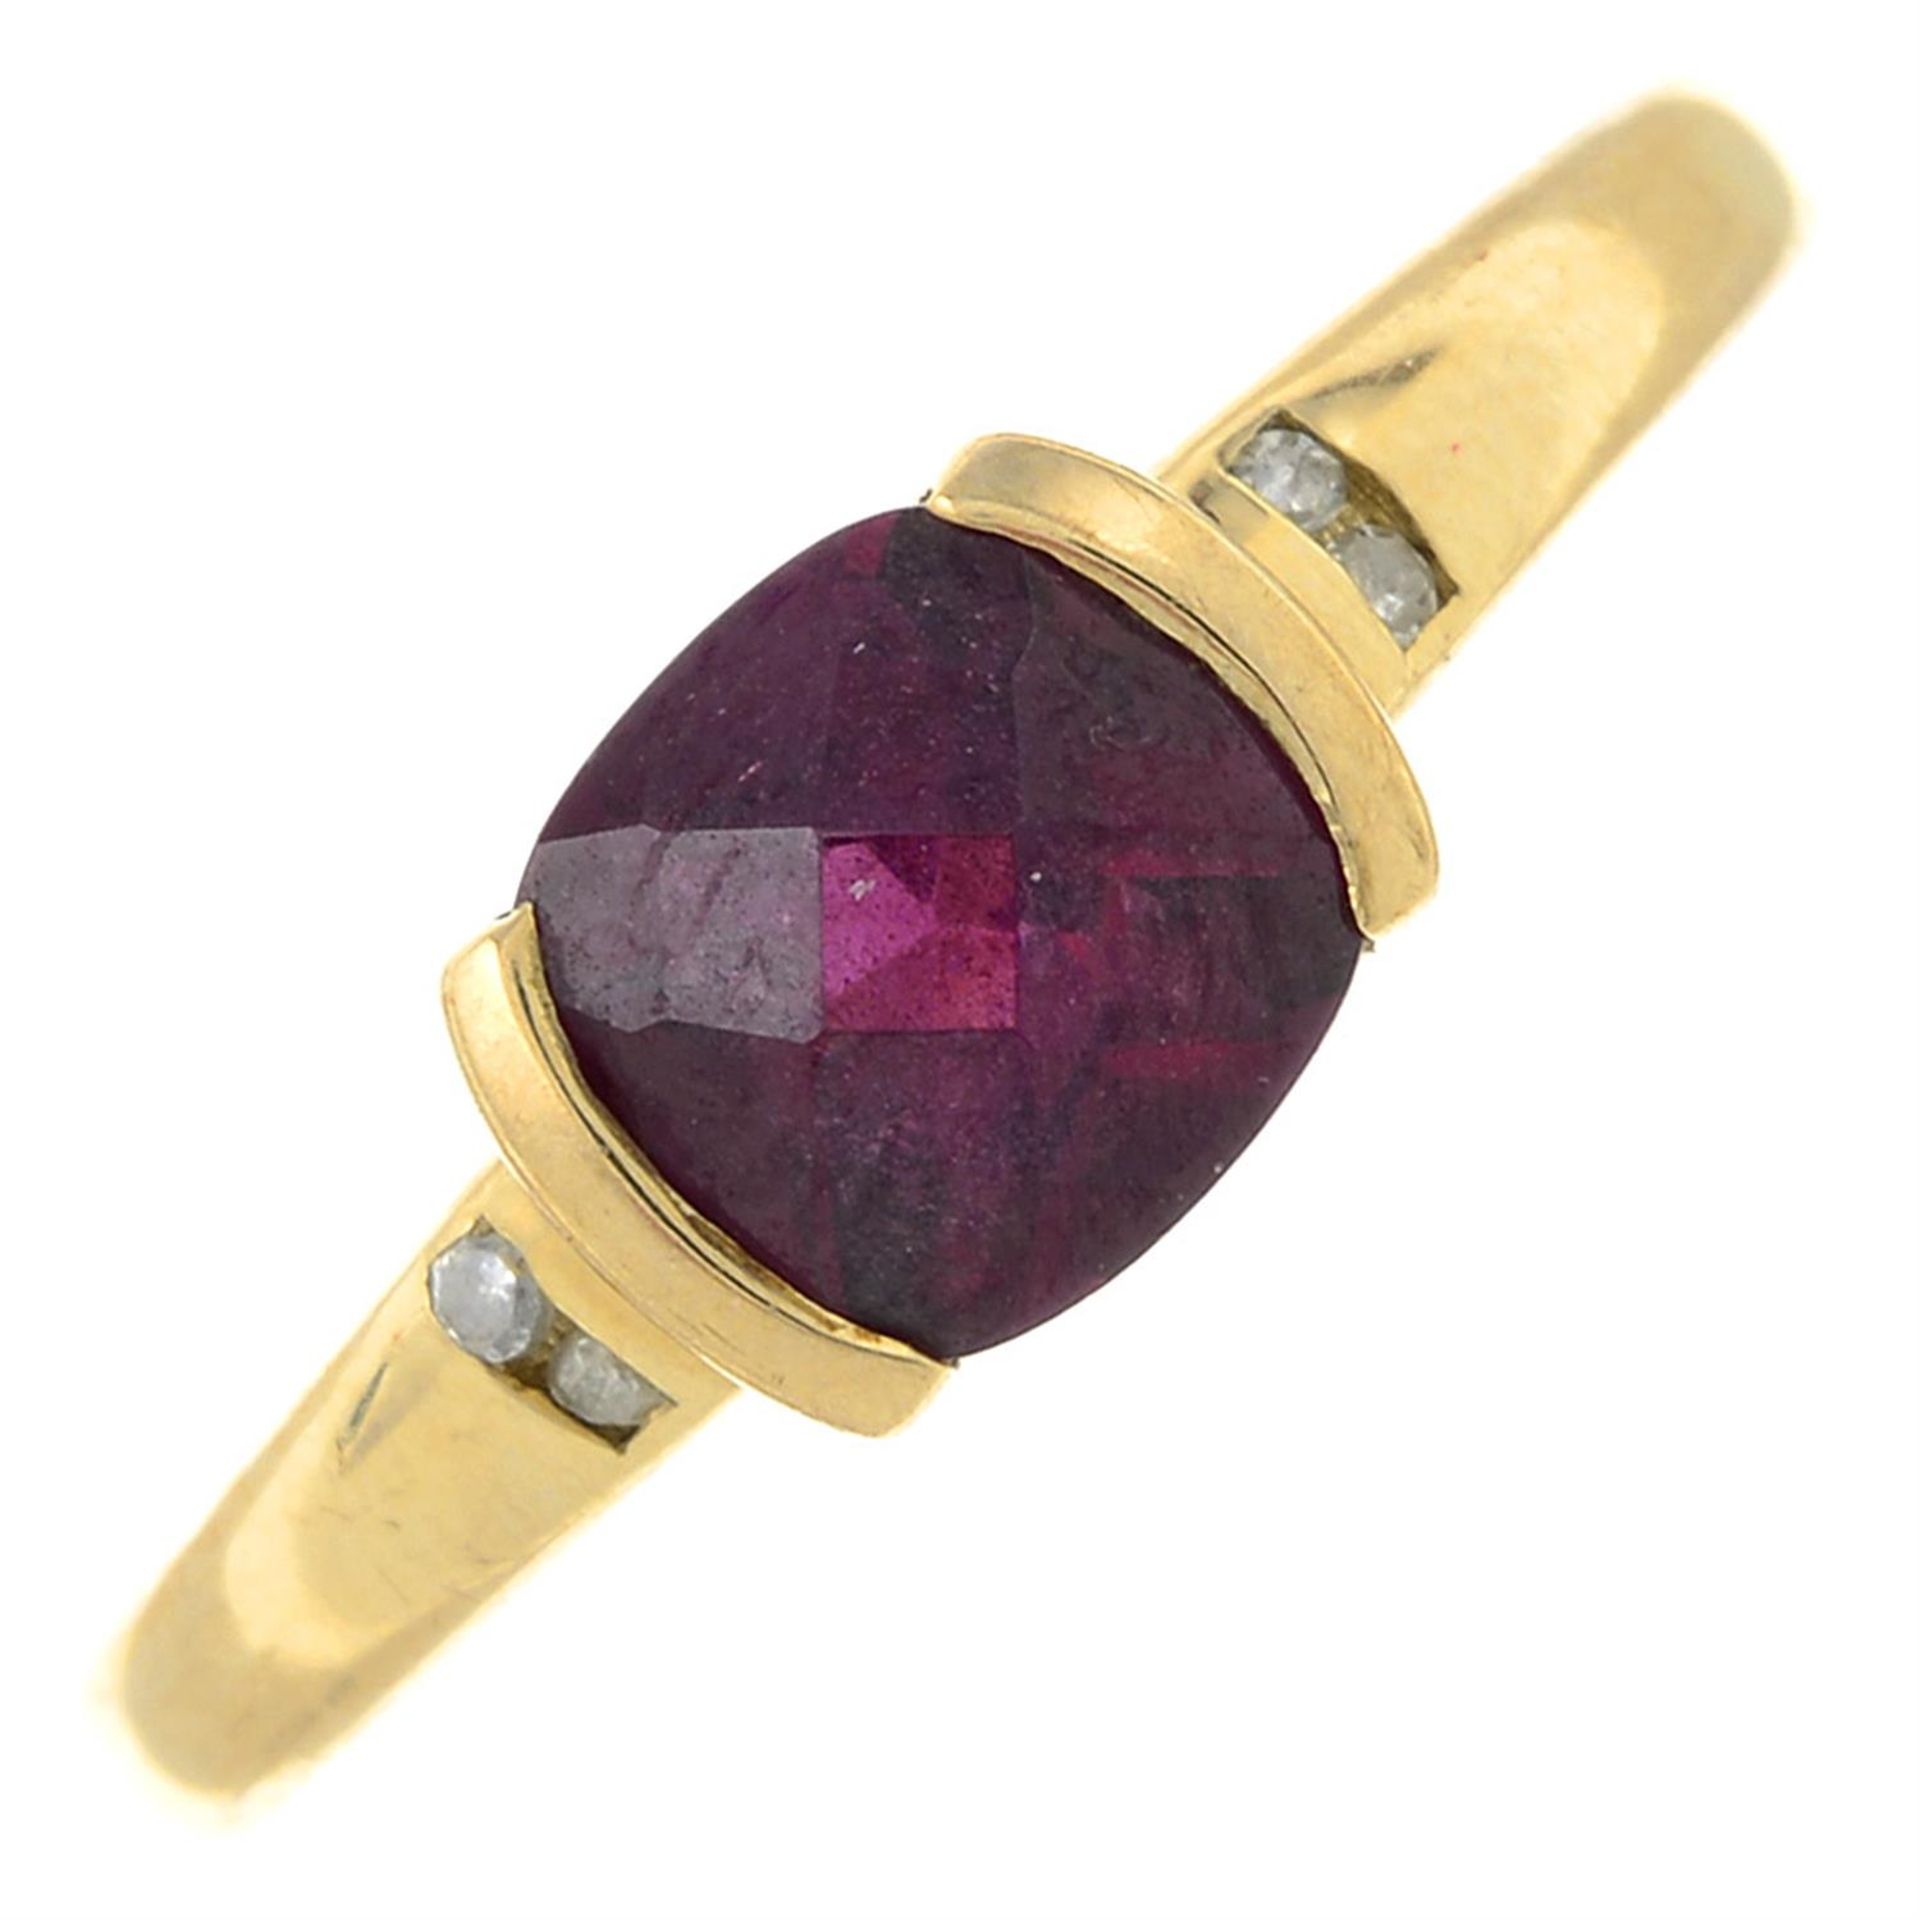 A 9ct gold garnet and diamond band ring.